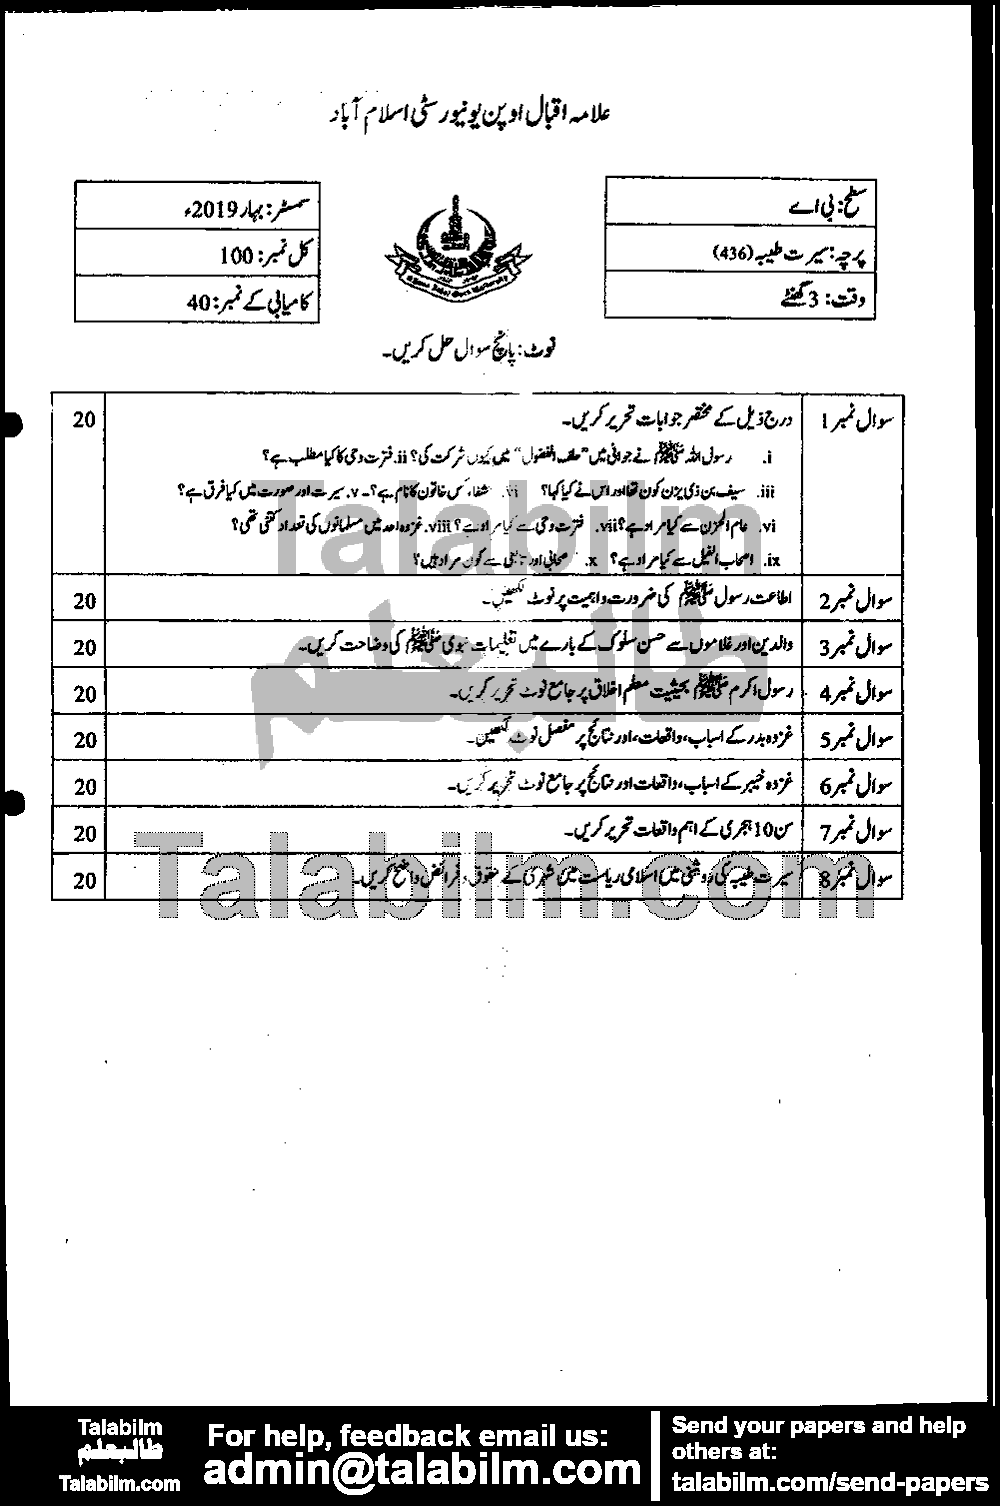 Seerat-e-Tayyaba 436 past paper for Spring 2019